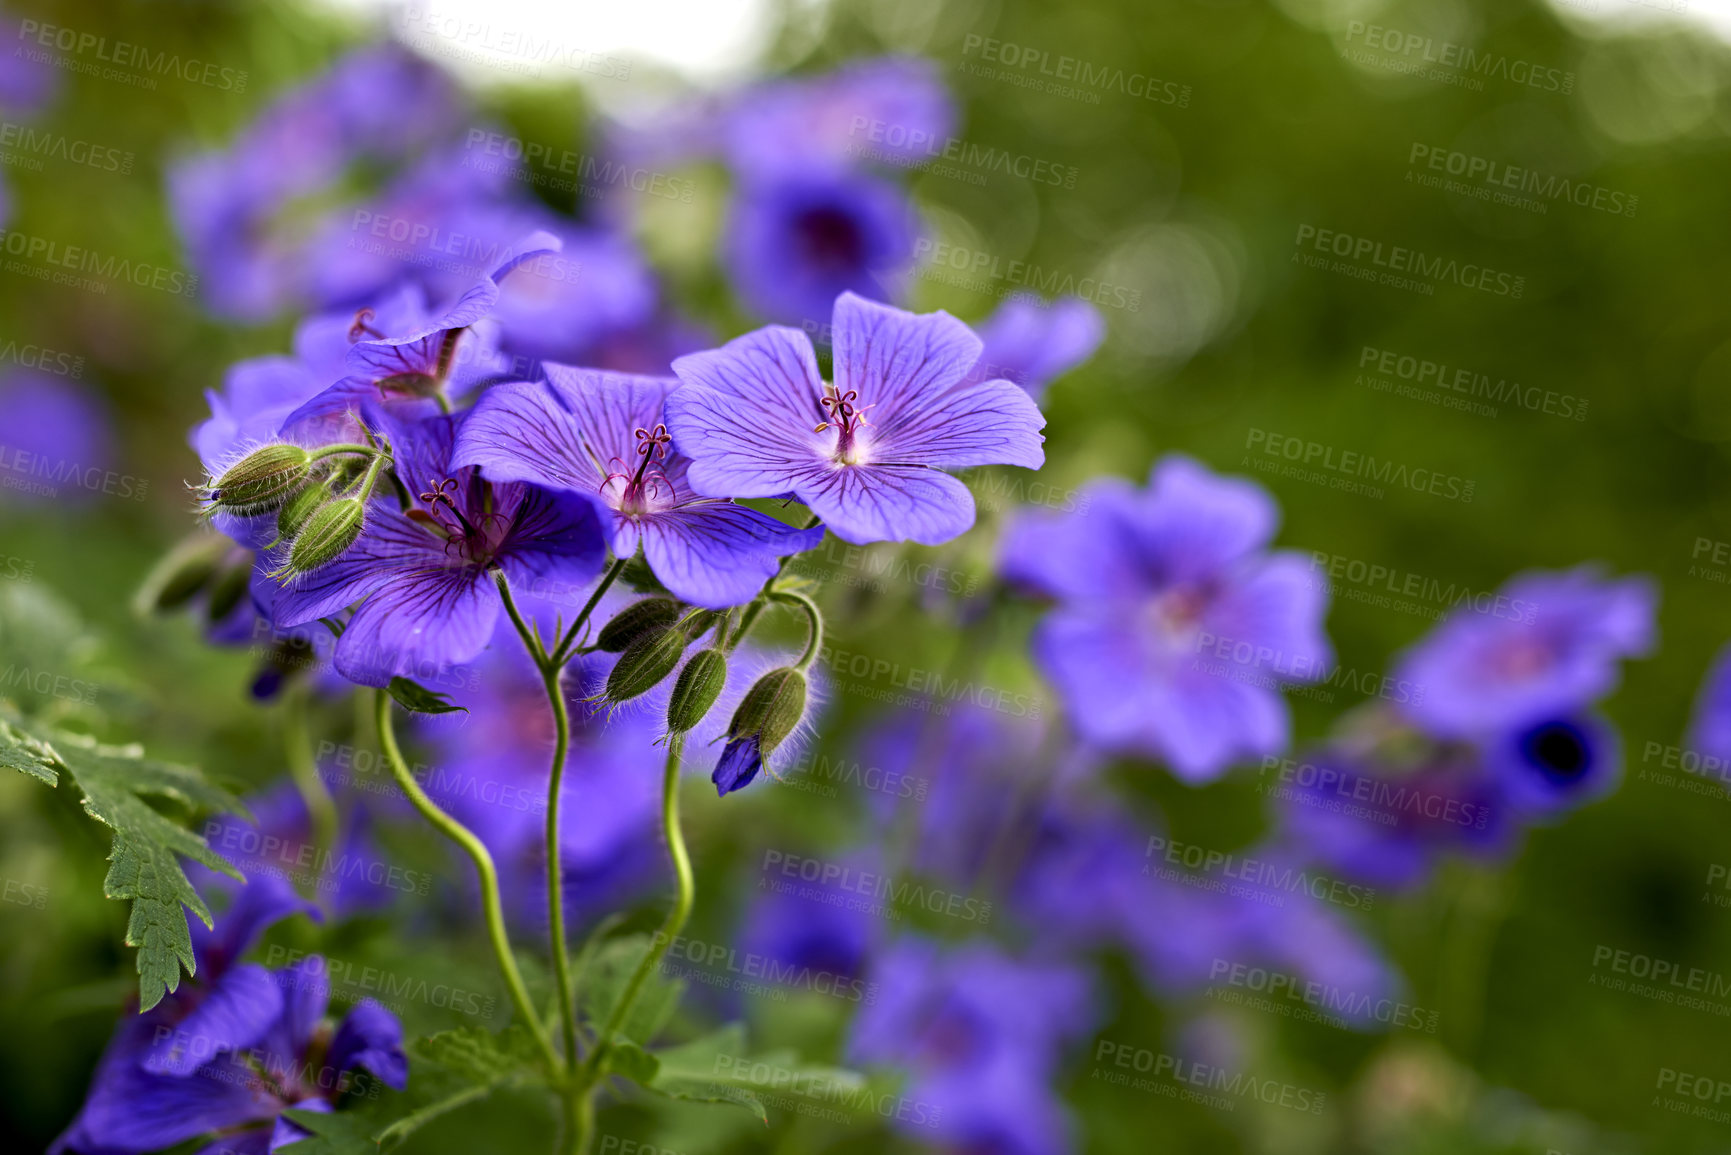 Buy stock photo Closeup of a Geranium flower in an ecological garden. Purple plants bloom during spring in a green field with lush foliage. Macro view of fresh, vibrant and bright, colorful flower petals outside